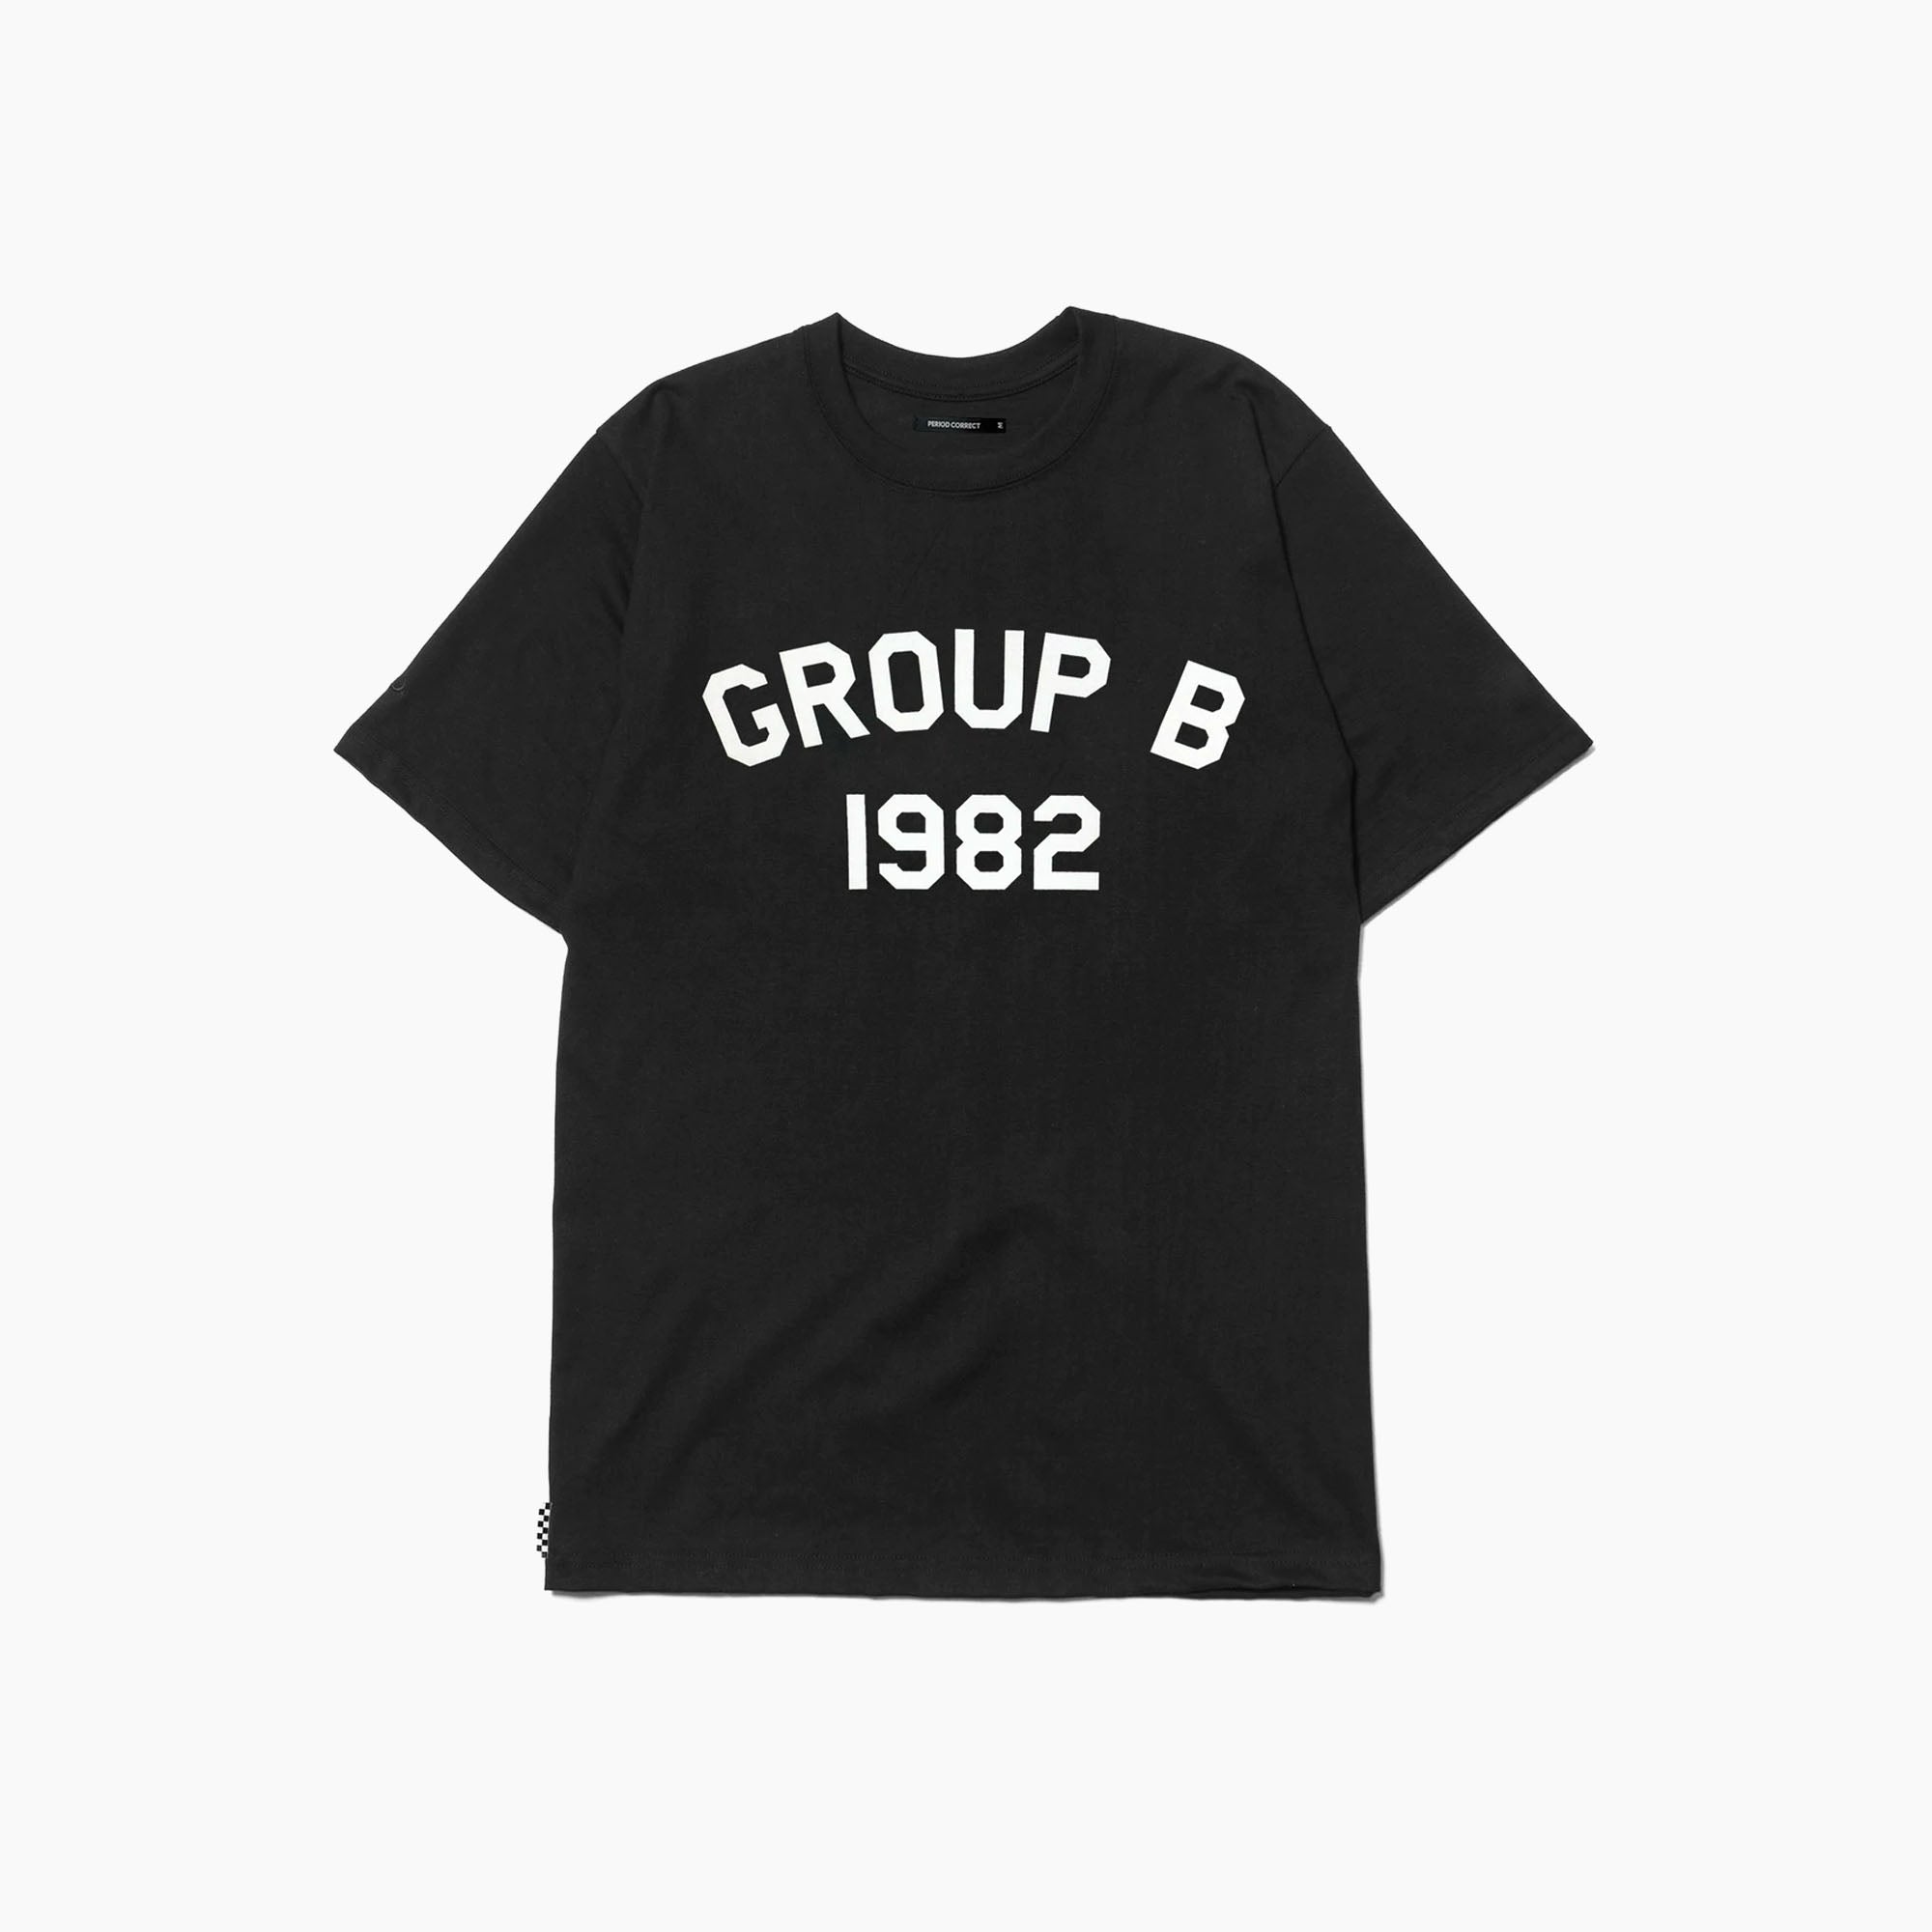 Period Correct | Group B T-Shirt-T-Shirt-Period Correct-gpx-store